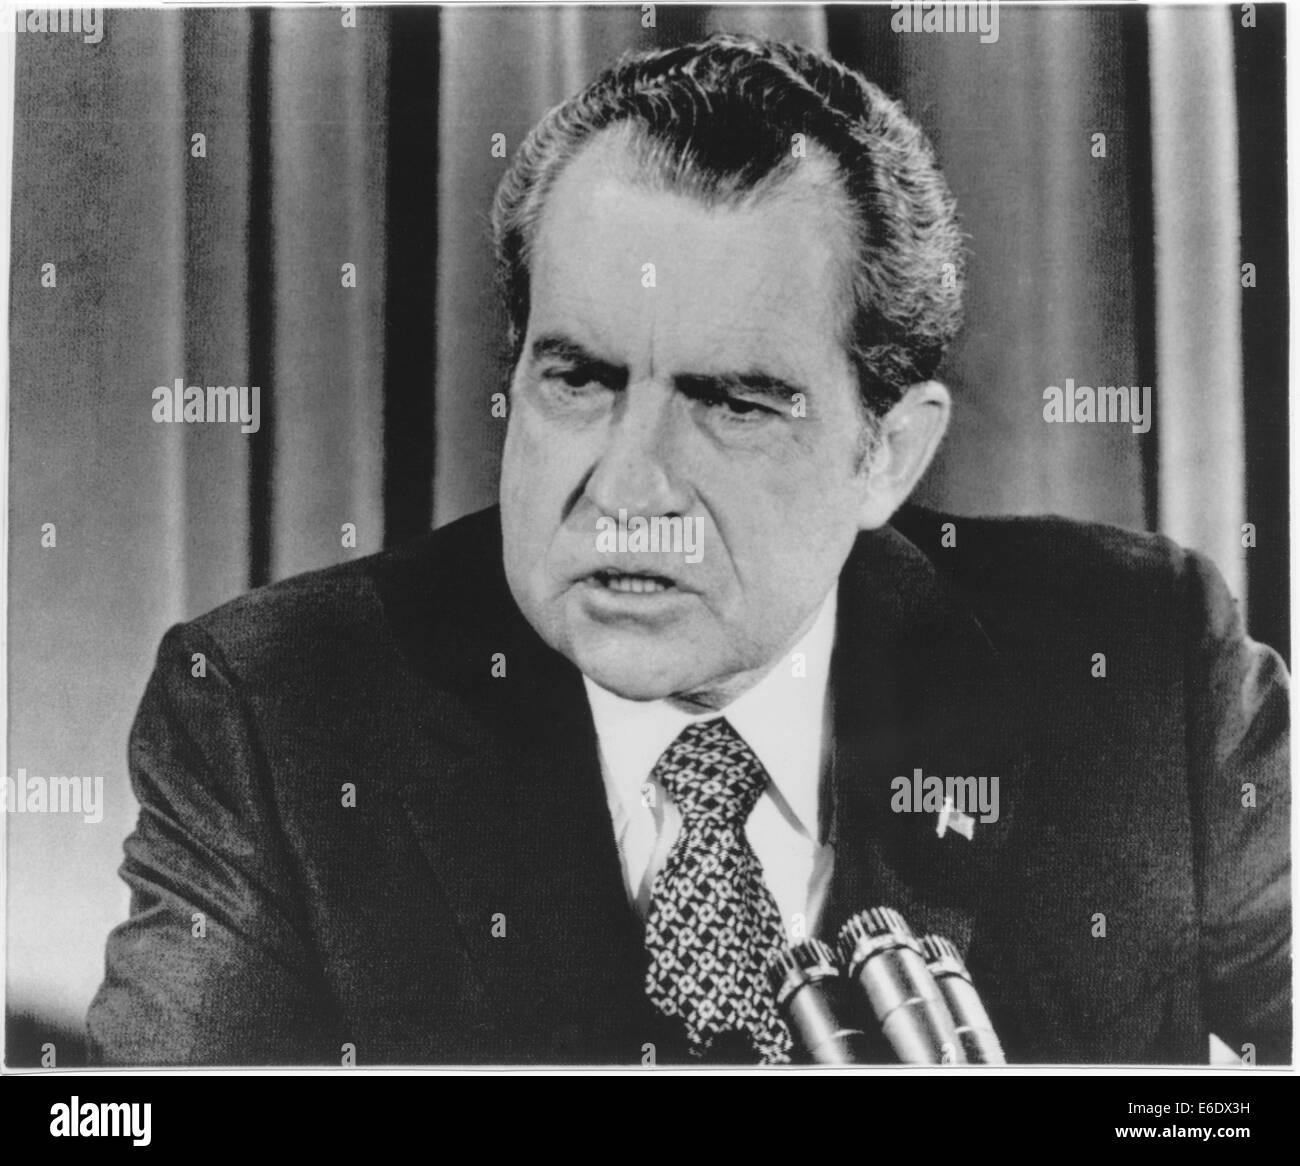 U.S. President Richard Nixon during Press Conference Regarding Middle East Crisis and Watergate, 1973 Stock Photo